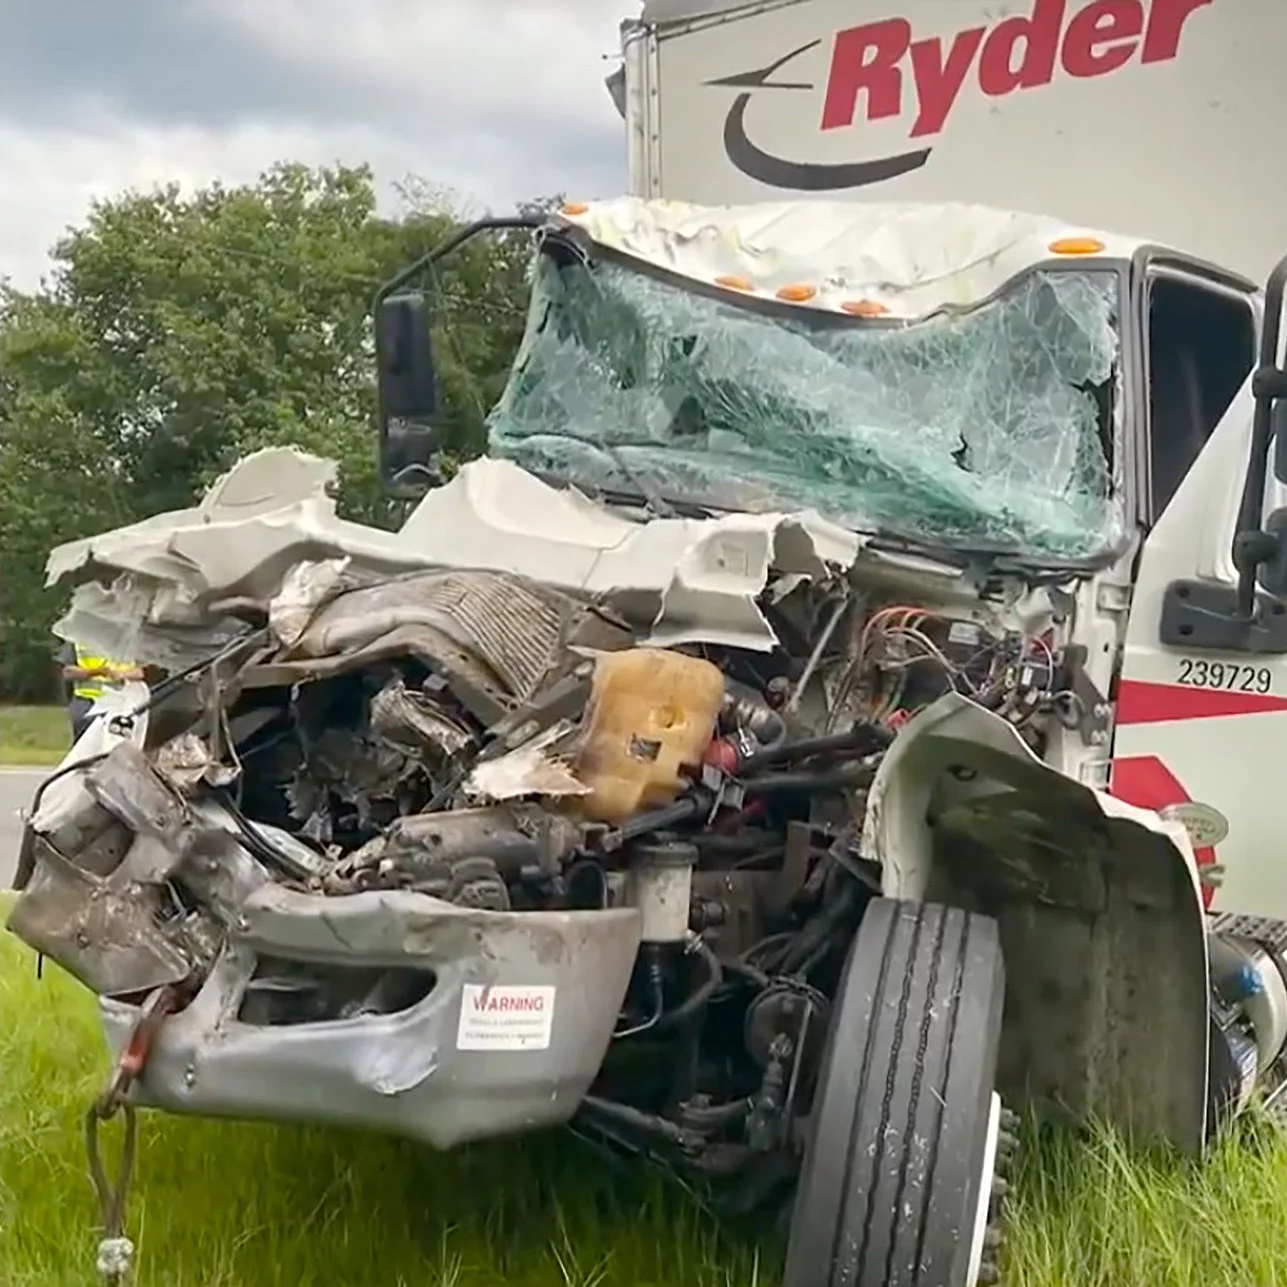 Dying Truck Driver Uses Final Breaths To Save School Children After Bus Crash